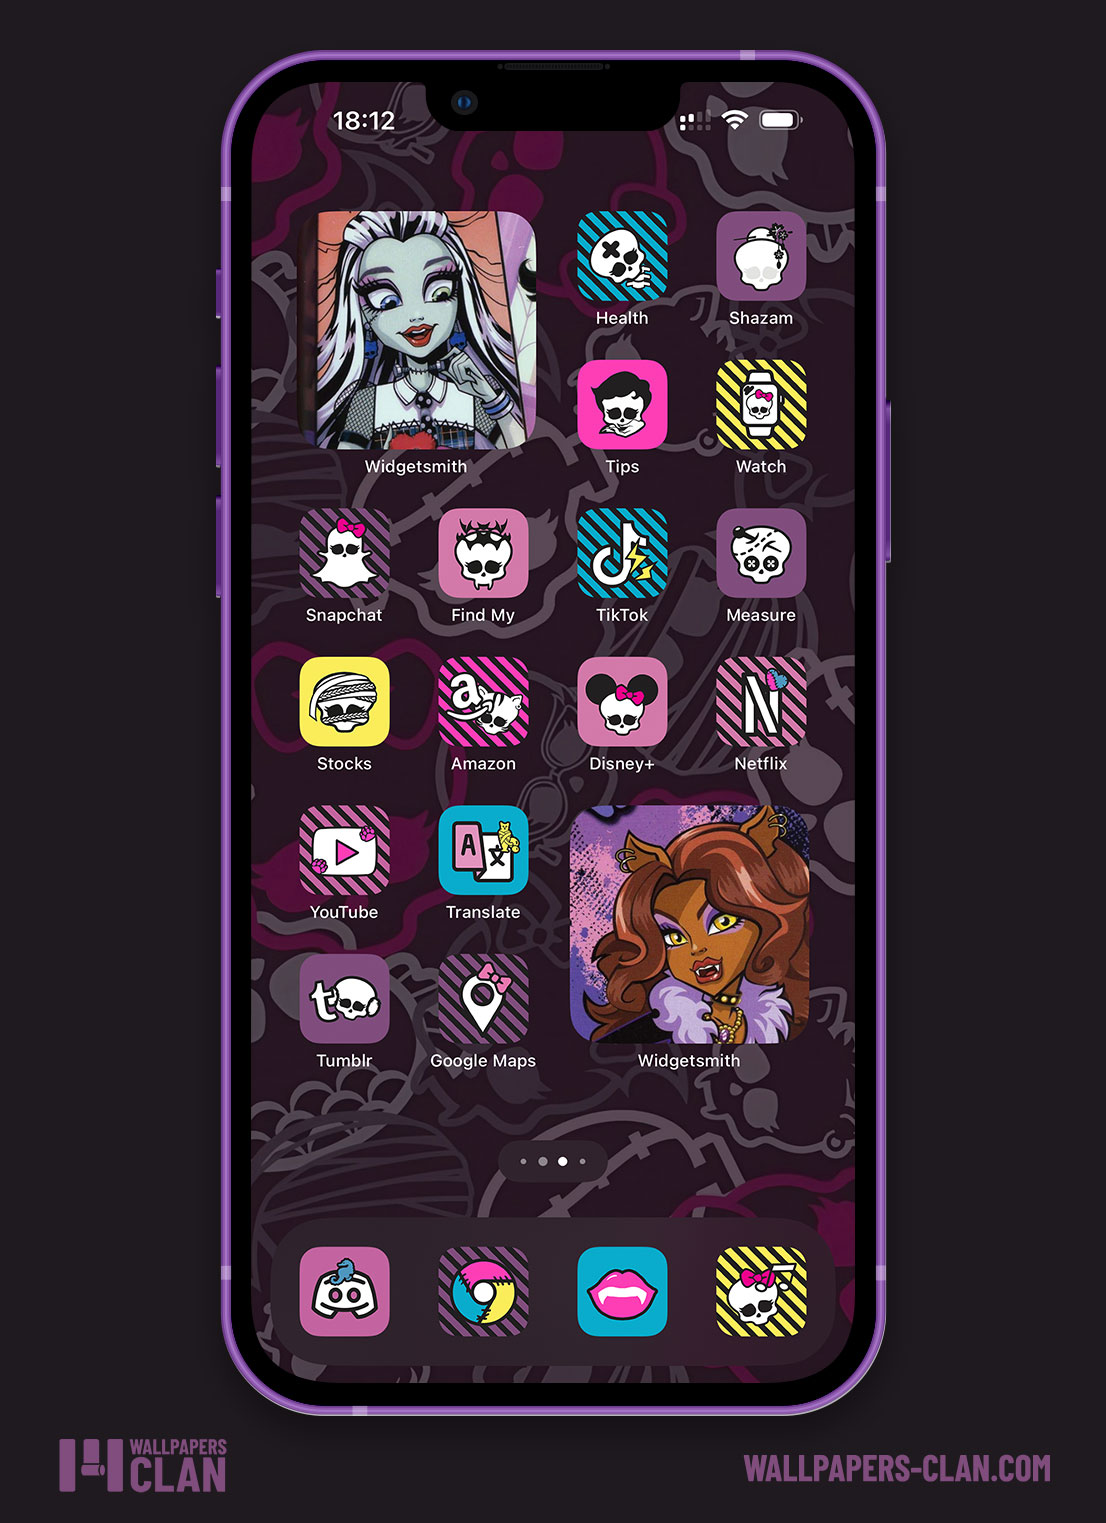 Monster High App Icons iOS & Android Free App Icons for iPhone